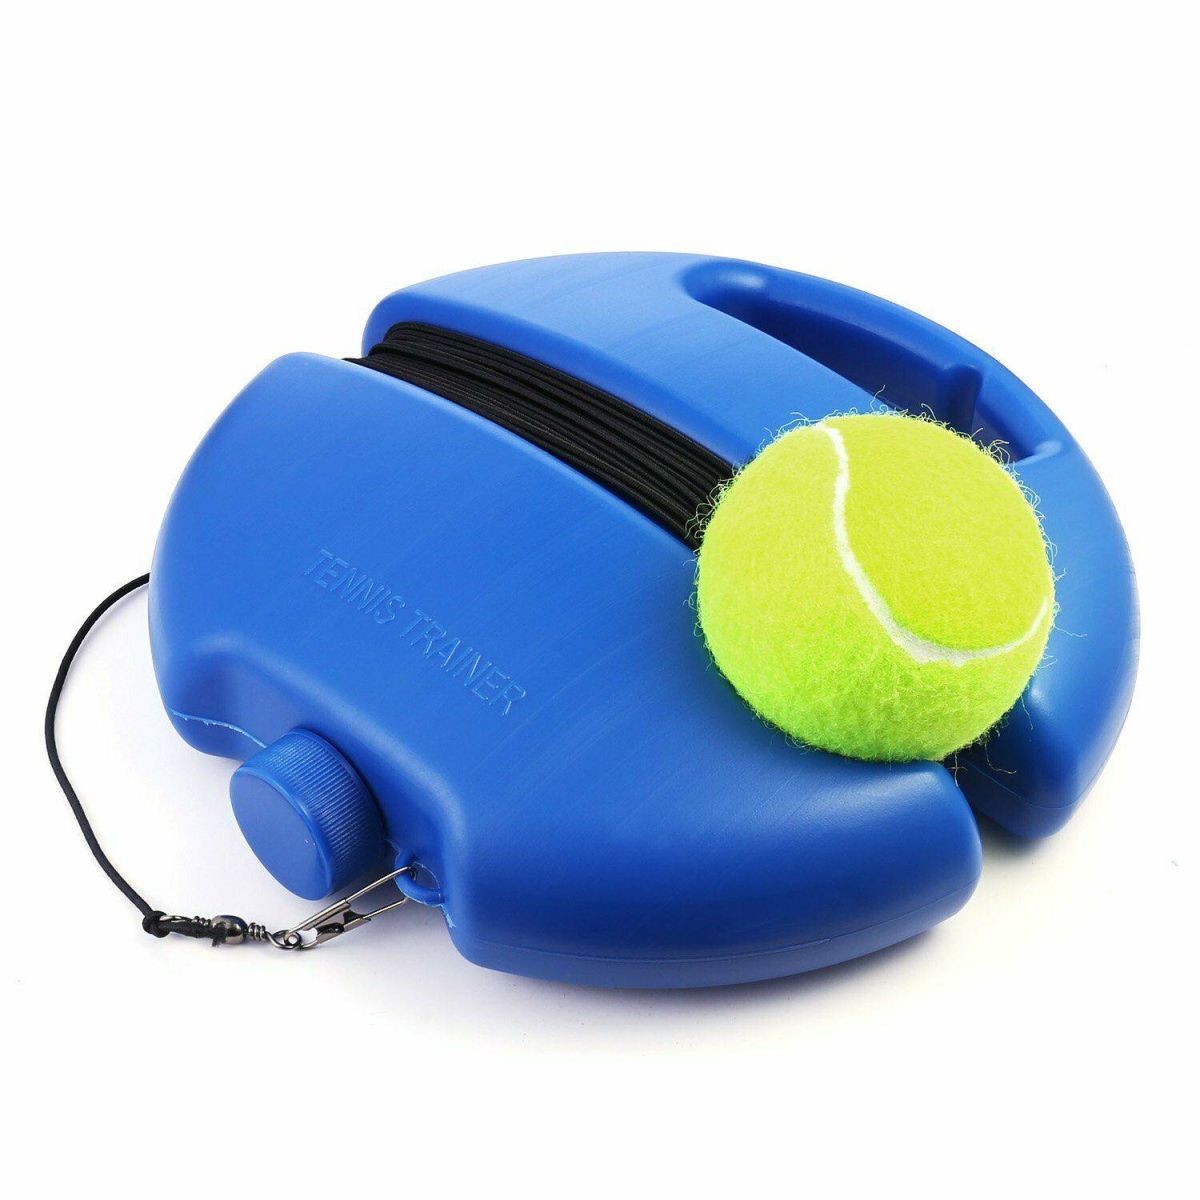 Automatic Rebound Equipment Base Single Practice Tennis Tool with Elastic Rubber String for kids,Tennis Beginner N/ A Tennis Trainer Rebound Ball 